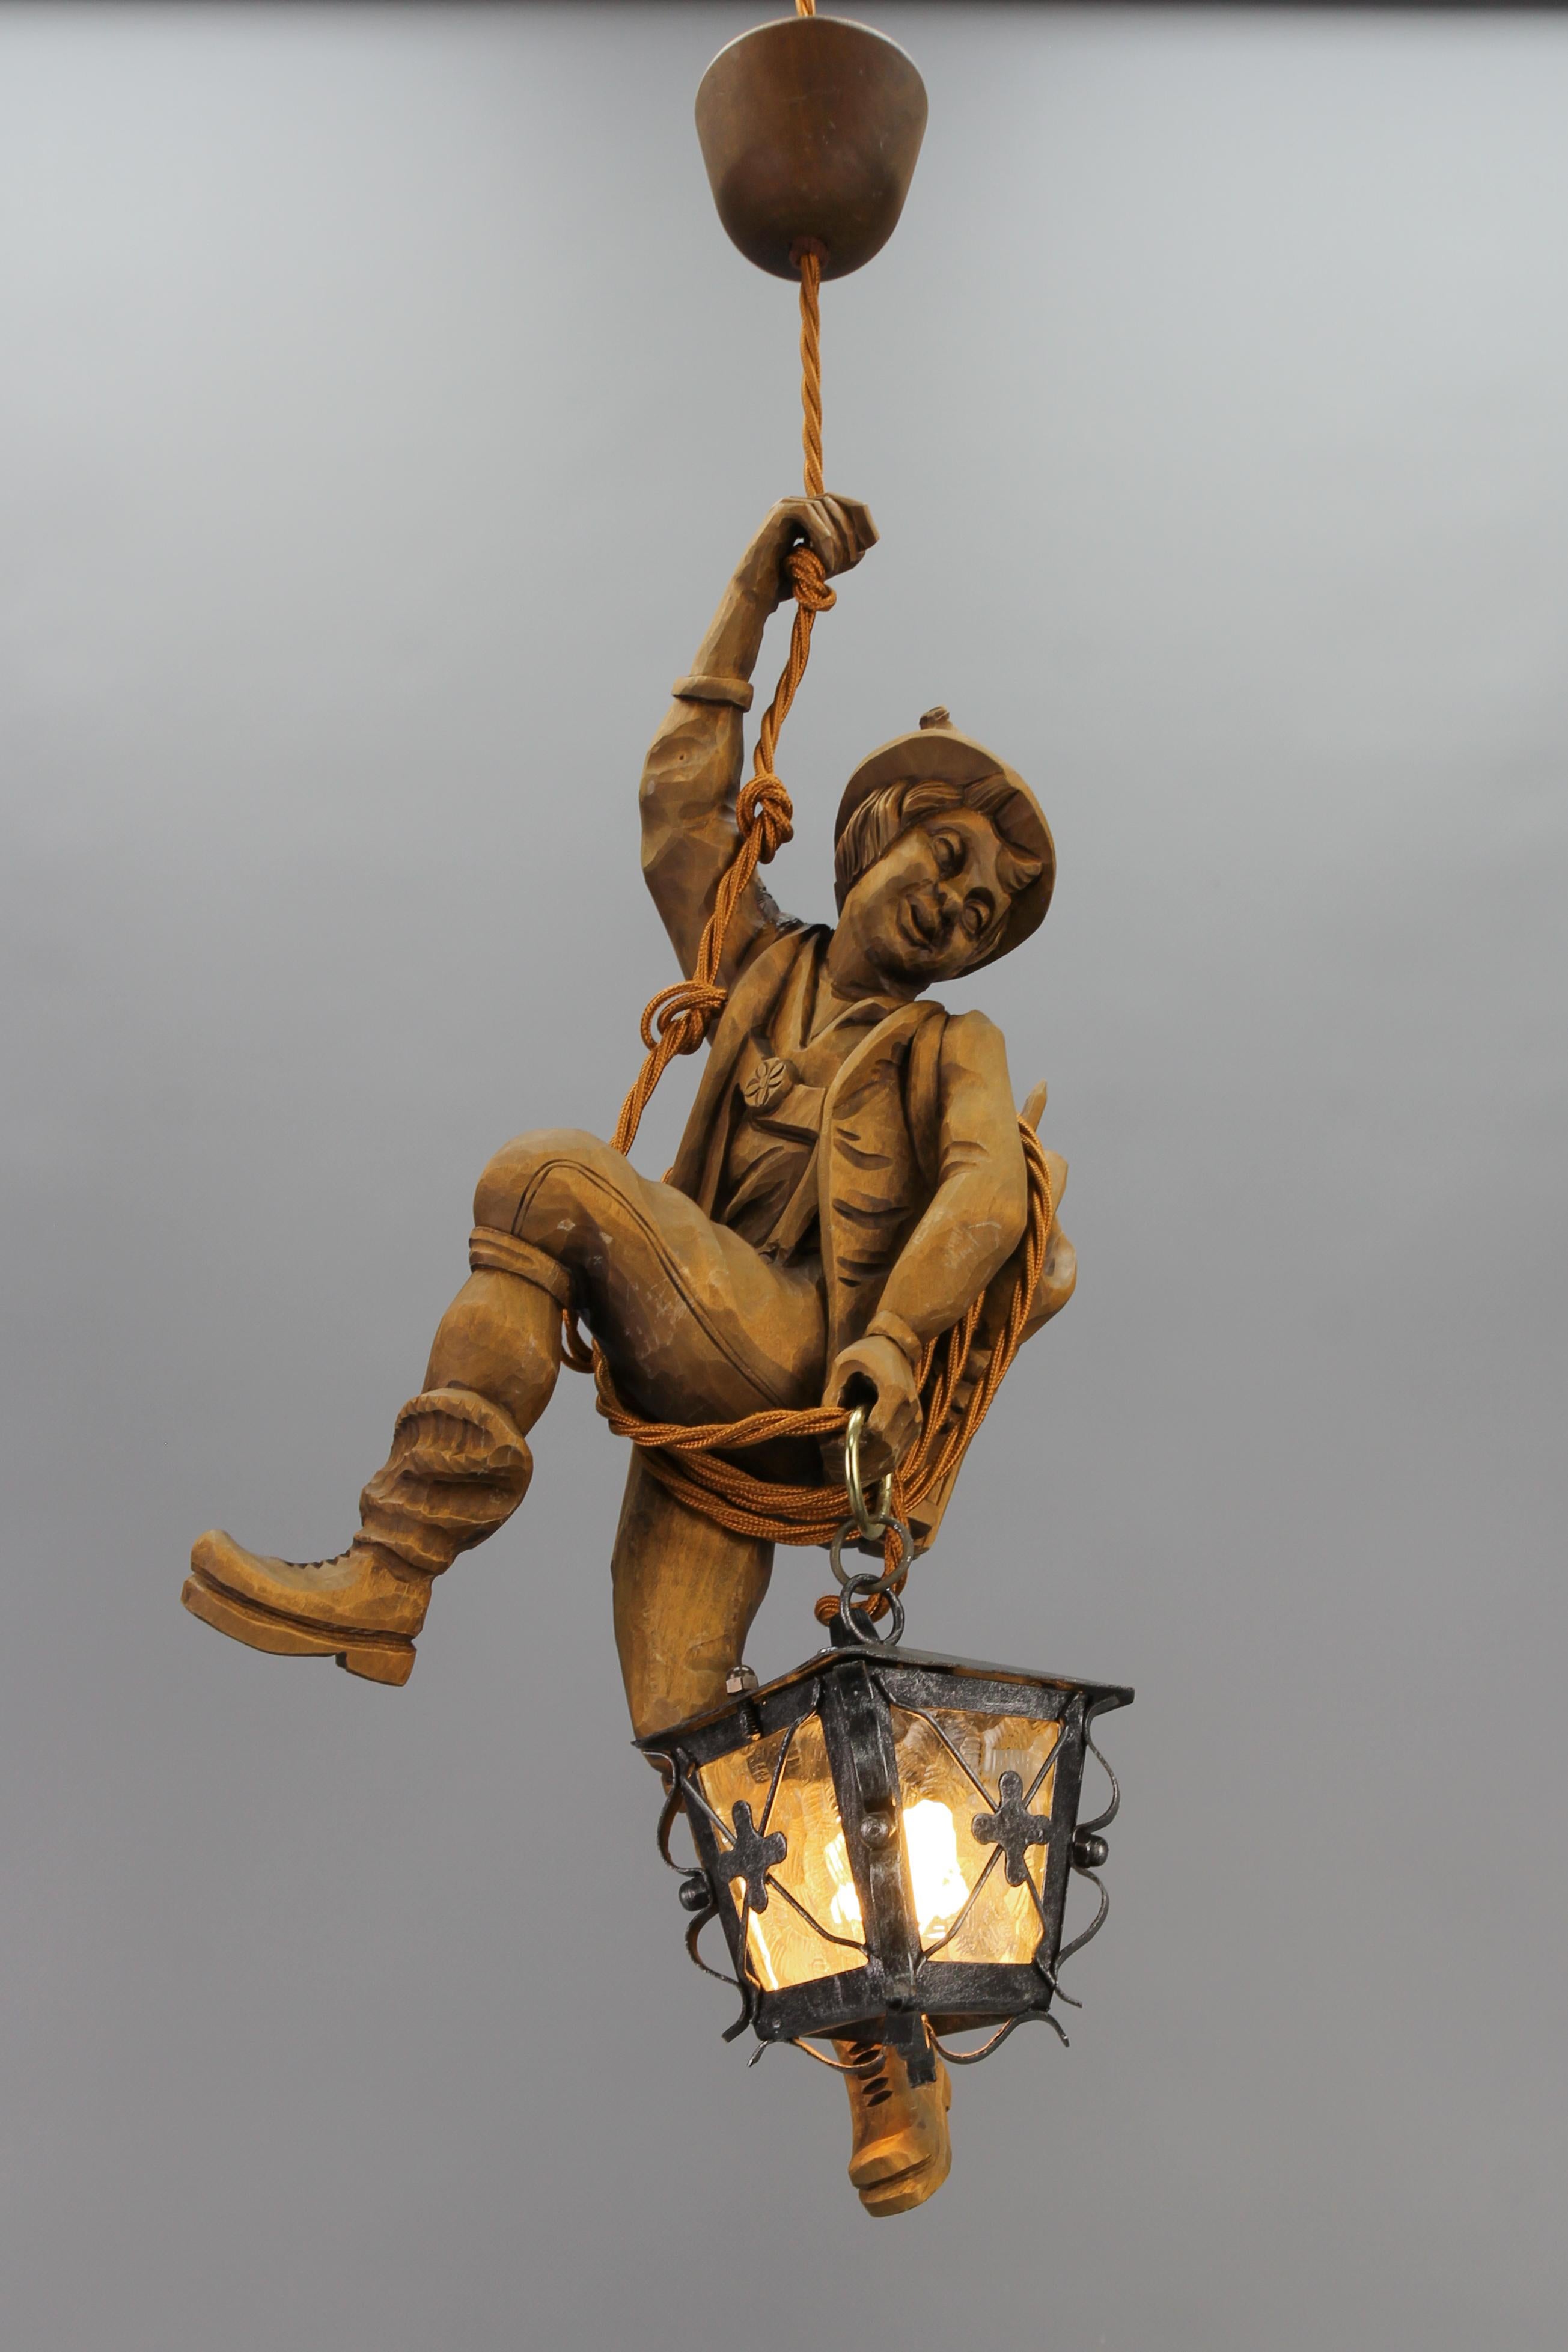 German Pendant Light with Carved Wooden Figure Mountain Climber and Lantern 14